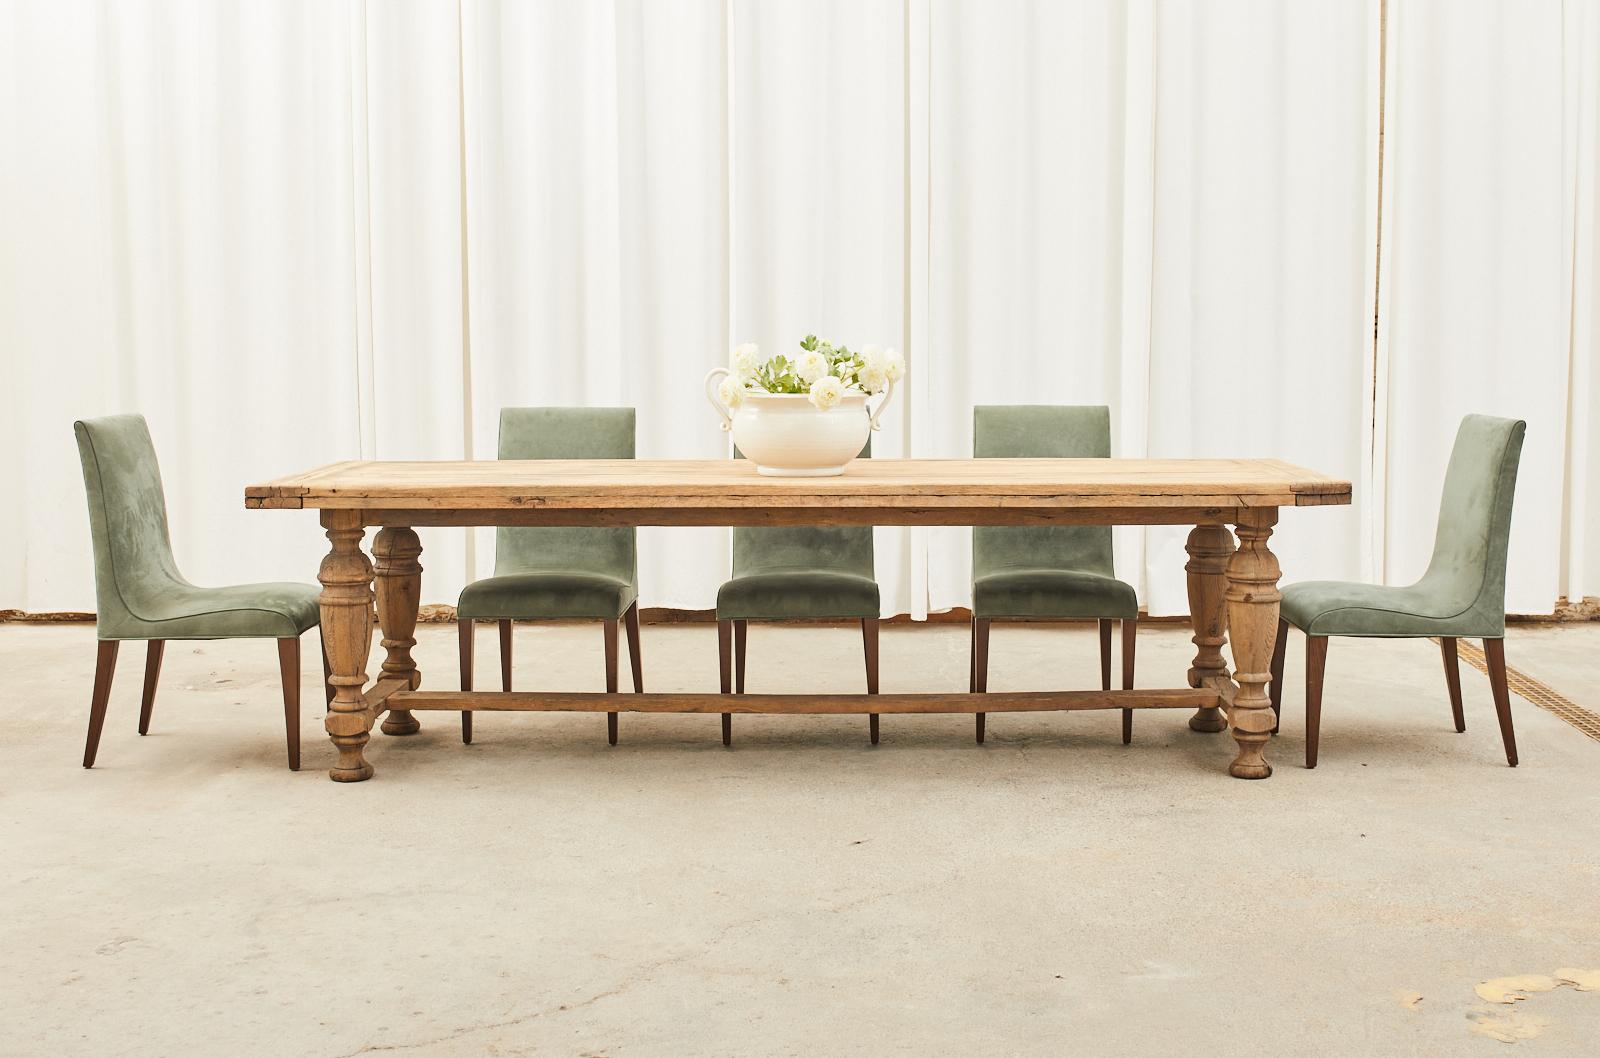 Bespoke set of eight modern style dining chairs crafted from hardwood frames. The chairs feature a gracefully curved seat upholstered with an Ultrasuede fabric in a laurel green shade color. Custom ordered from the design center in San Francisco,